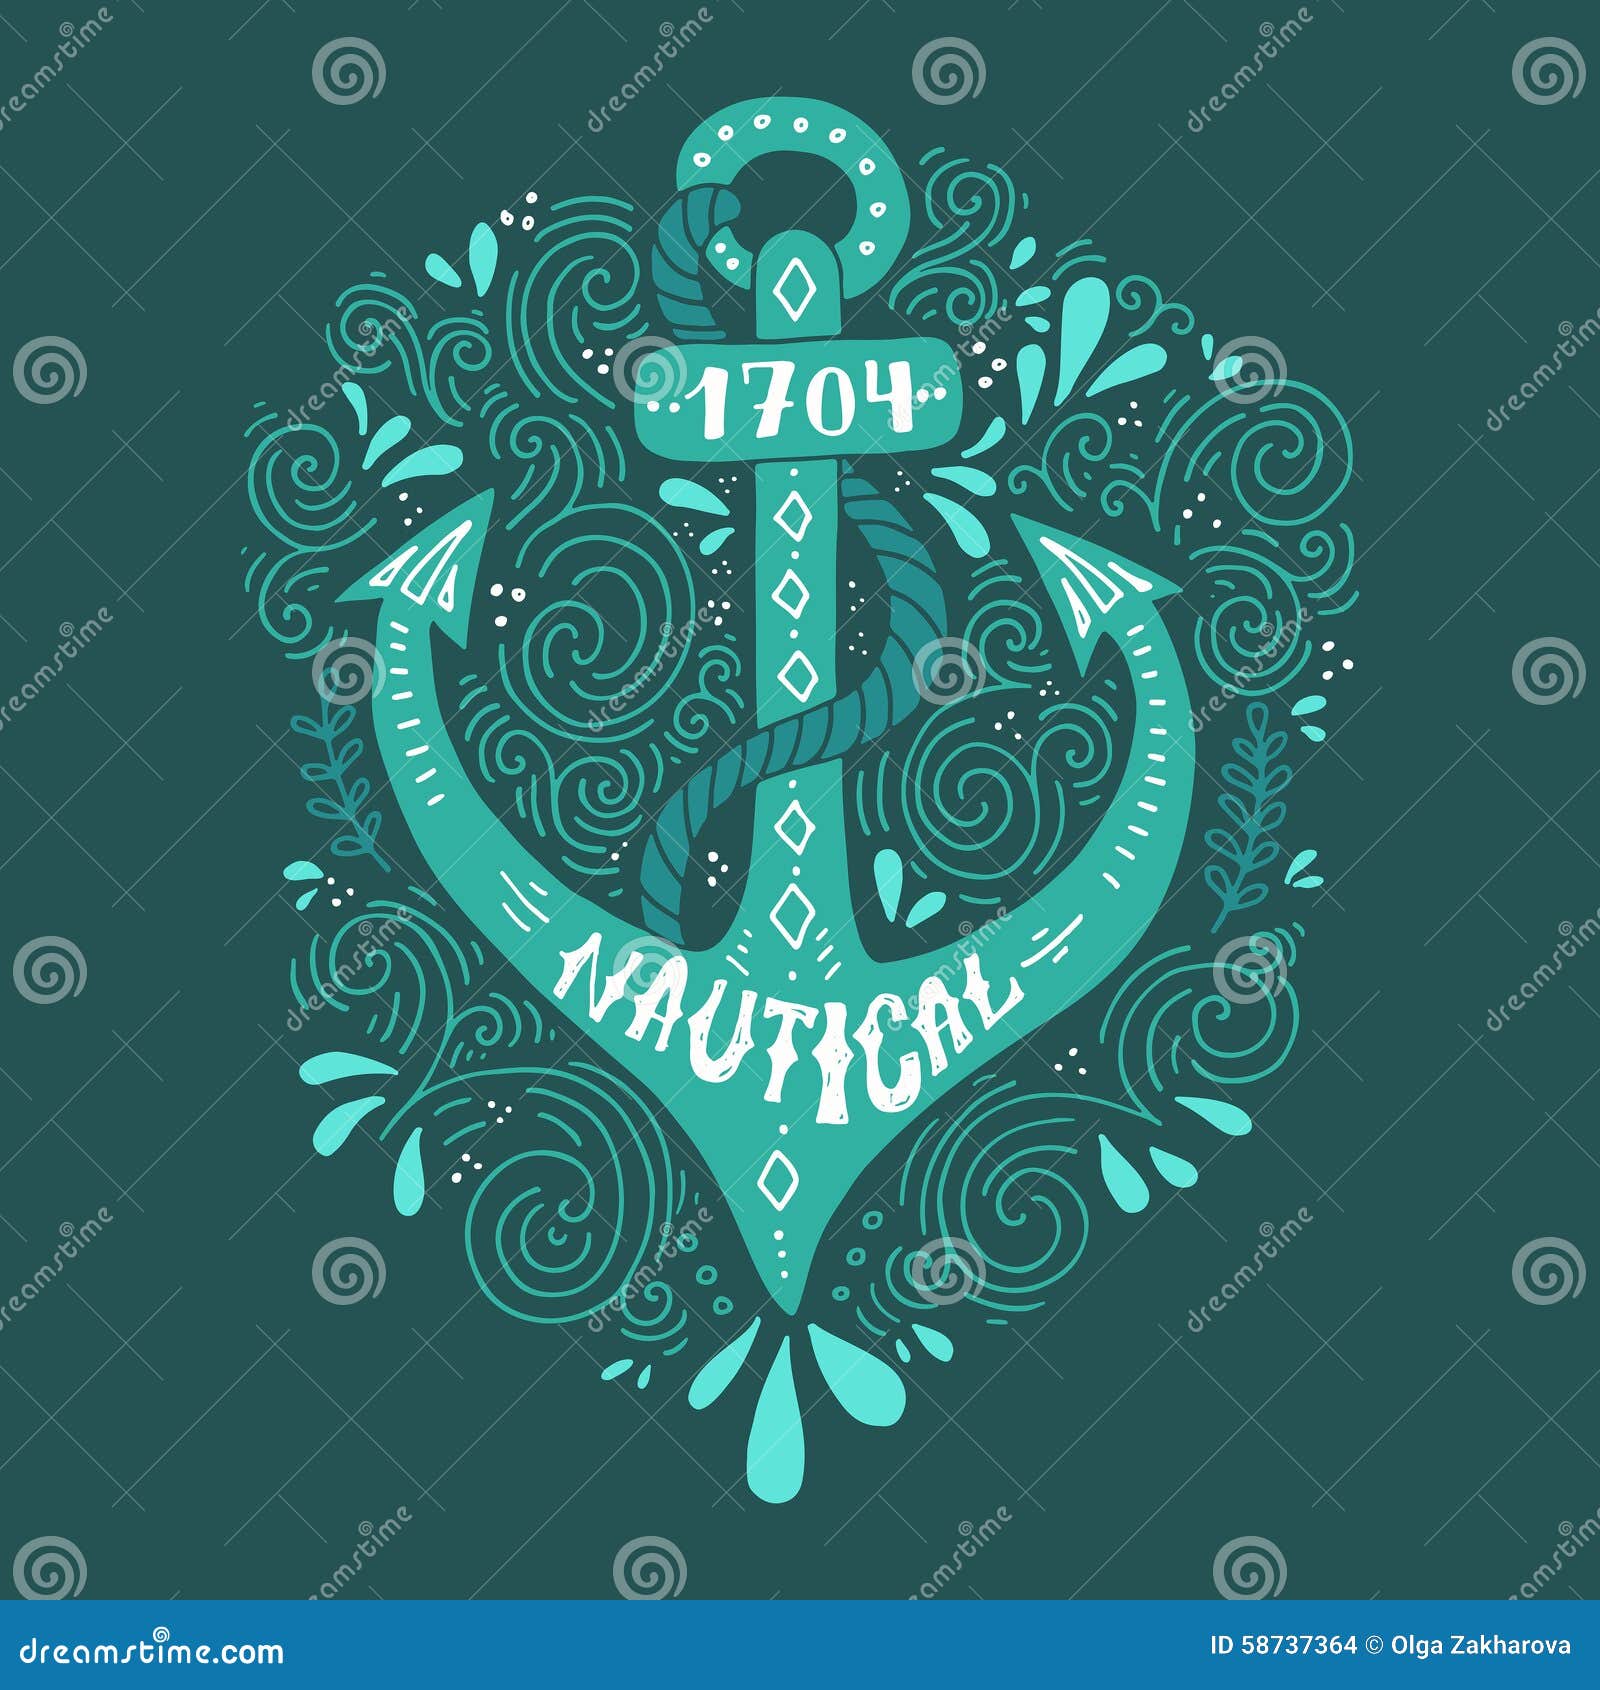 Nautical Lettering stock vector. Illustration of quote - 58737364